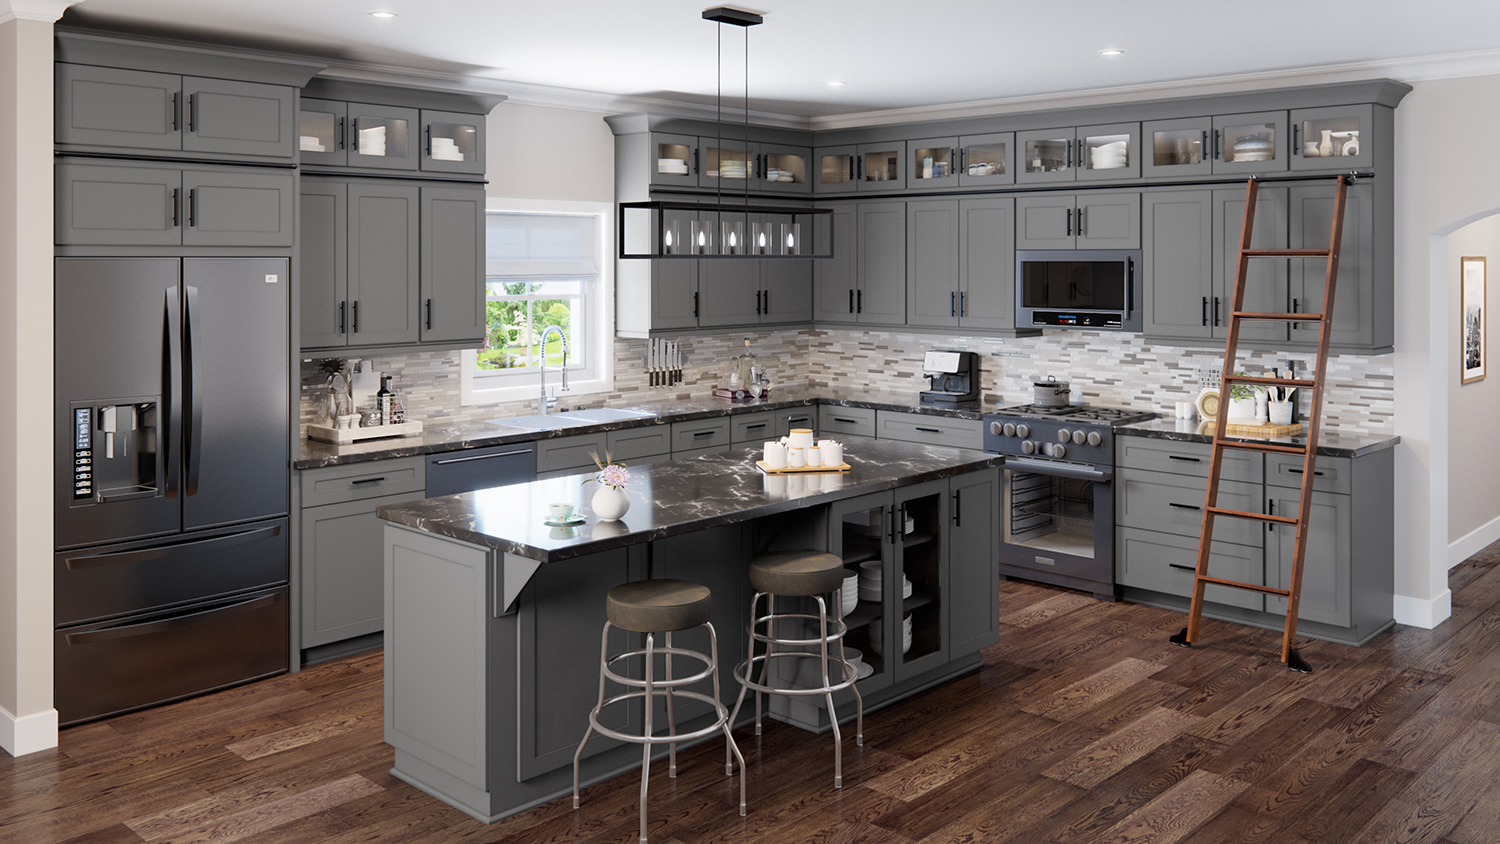 Kitchen Cabinets: Are they Cheaper to Build or Buy? - Firenza Stone